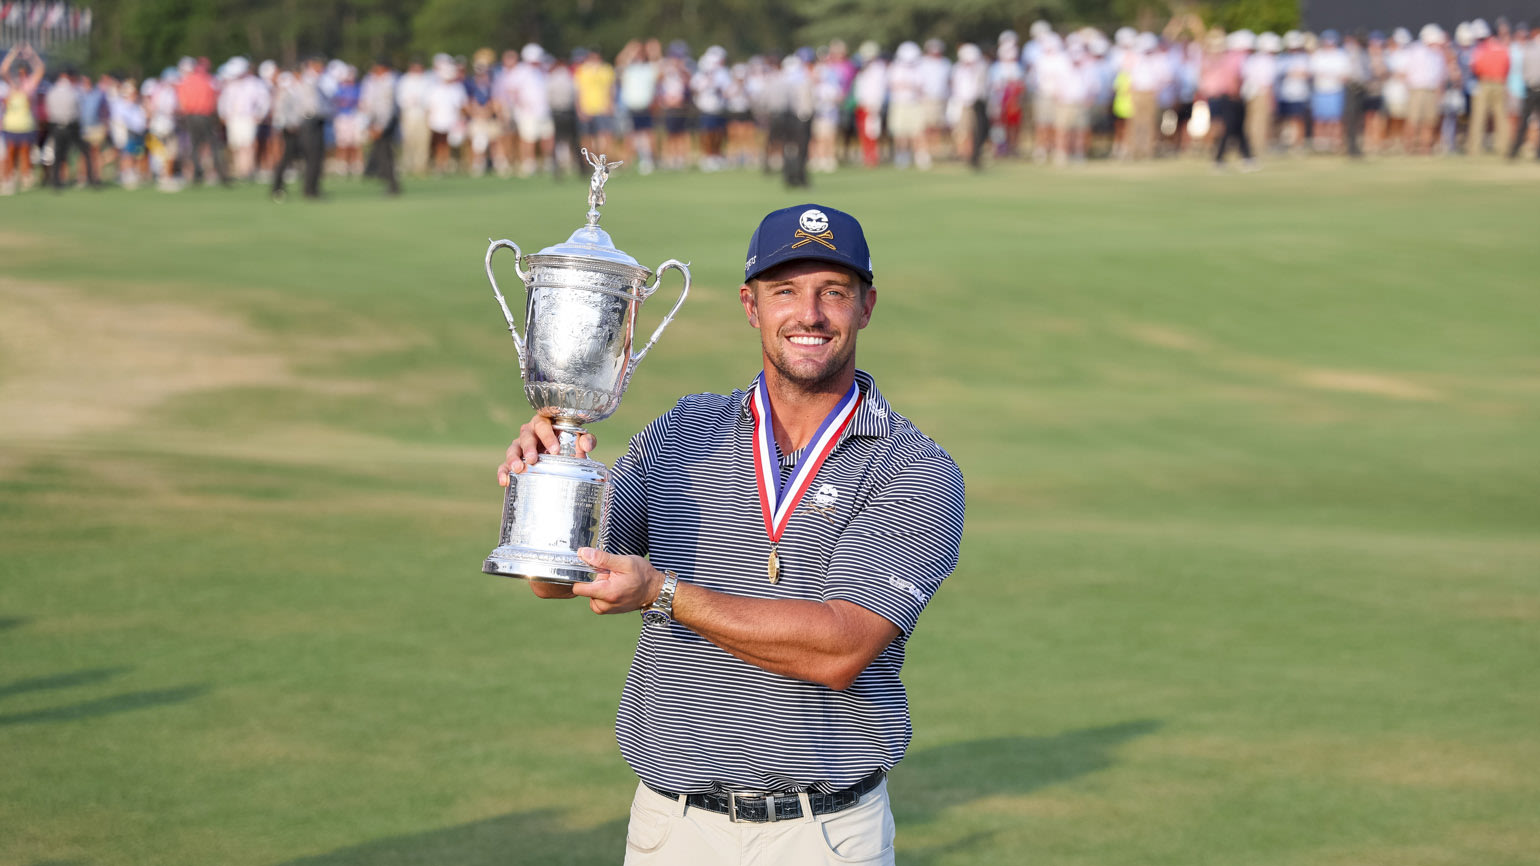 Bryson DeChambeau became the 23rd player to win multiple U.S. Open titles, joining some of game's legendary figures. (USGA/Jeff Haynes)